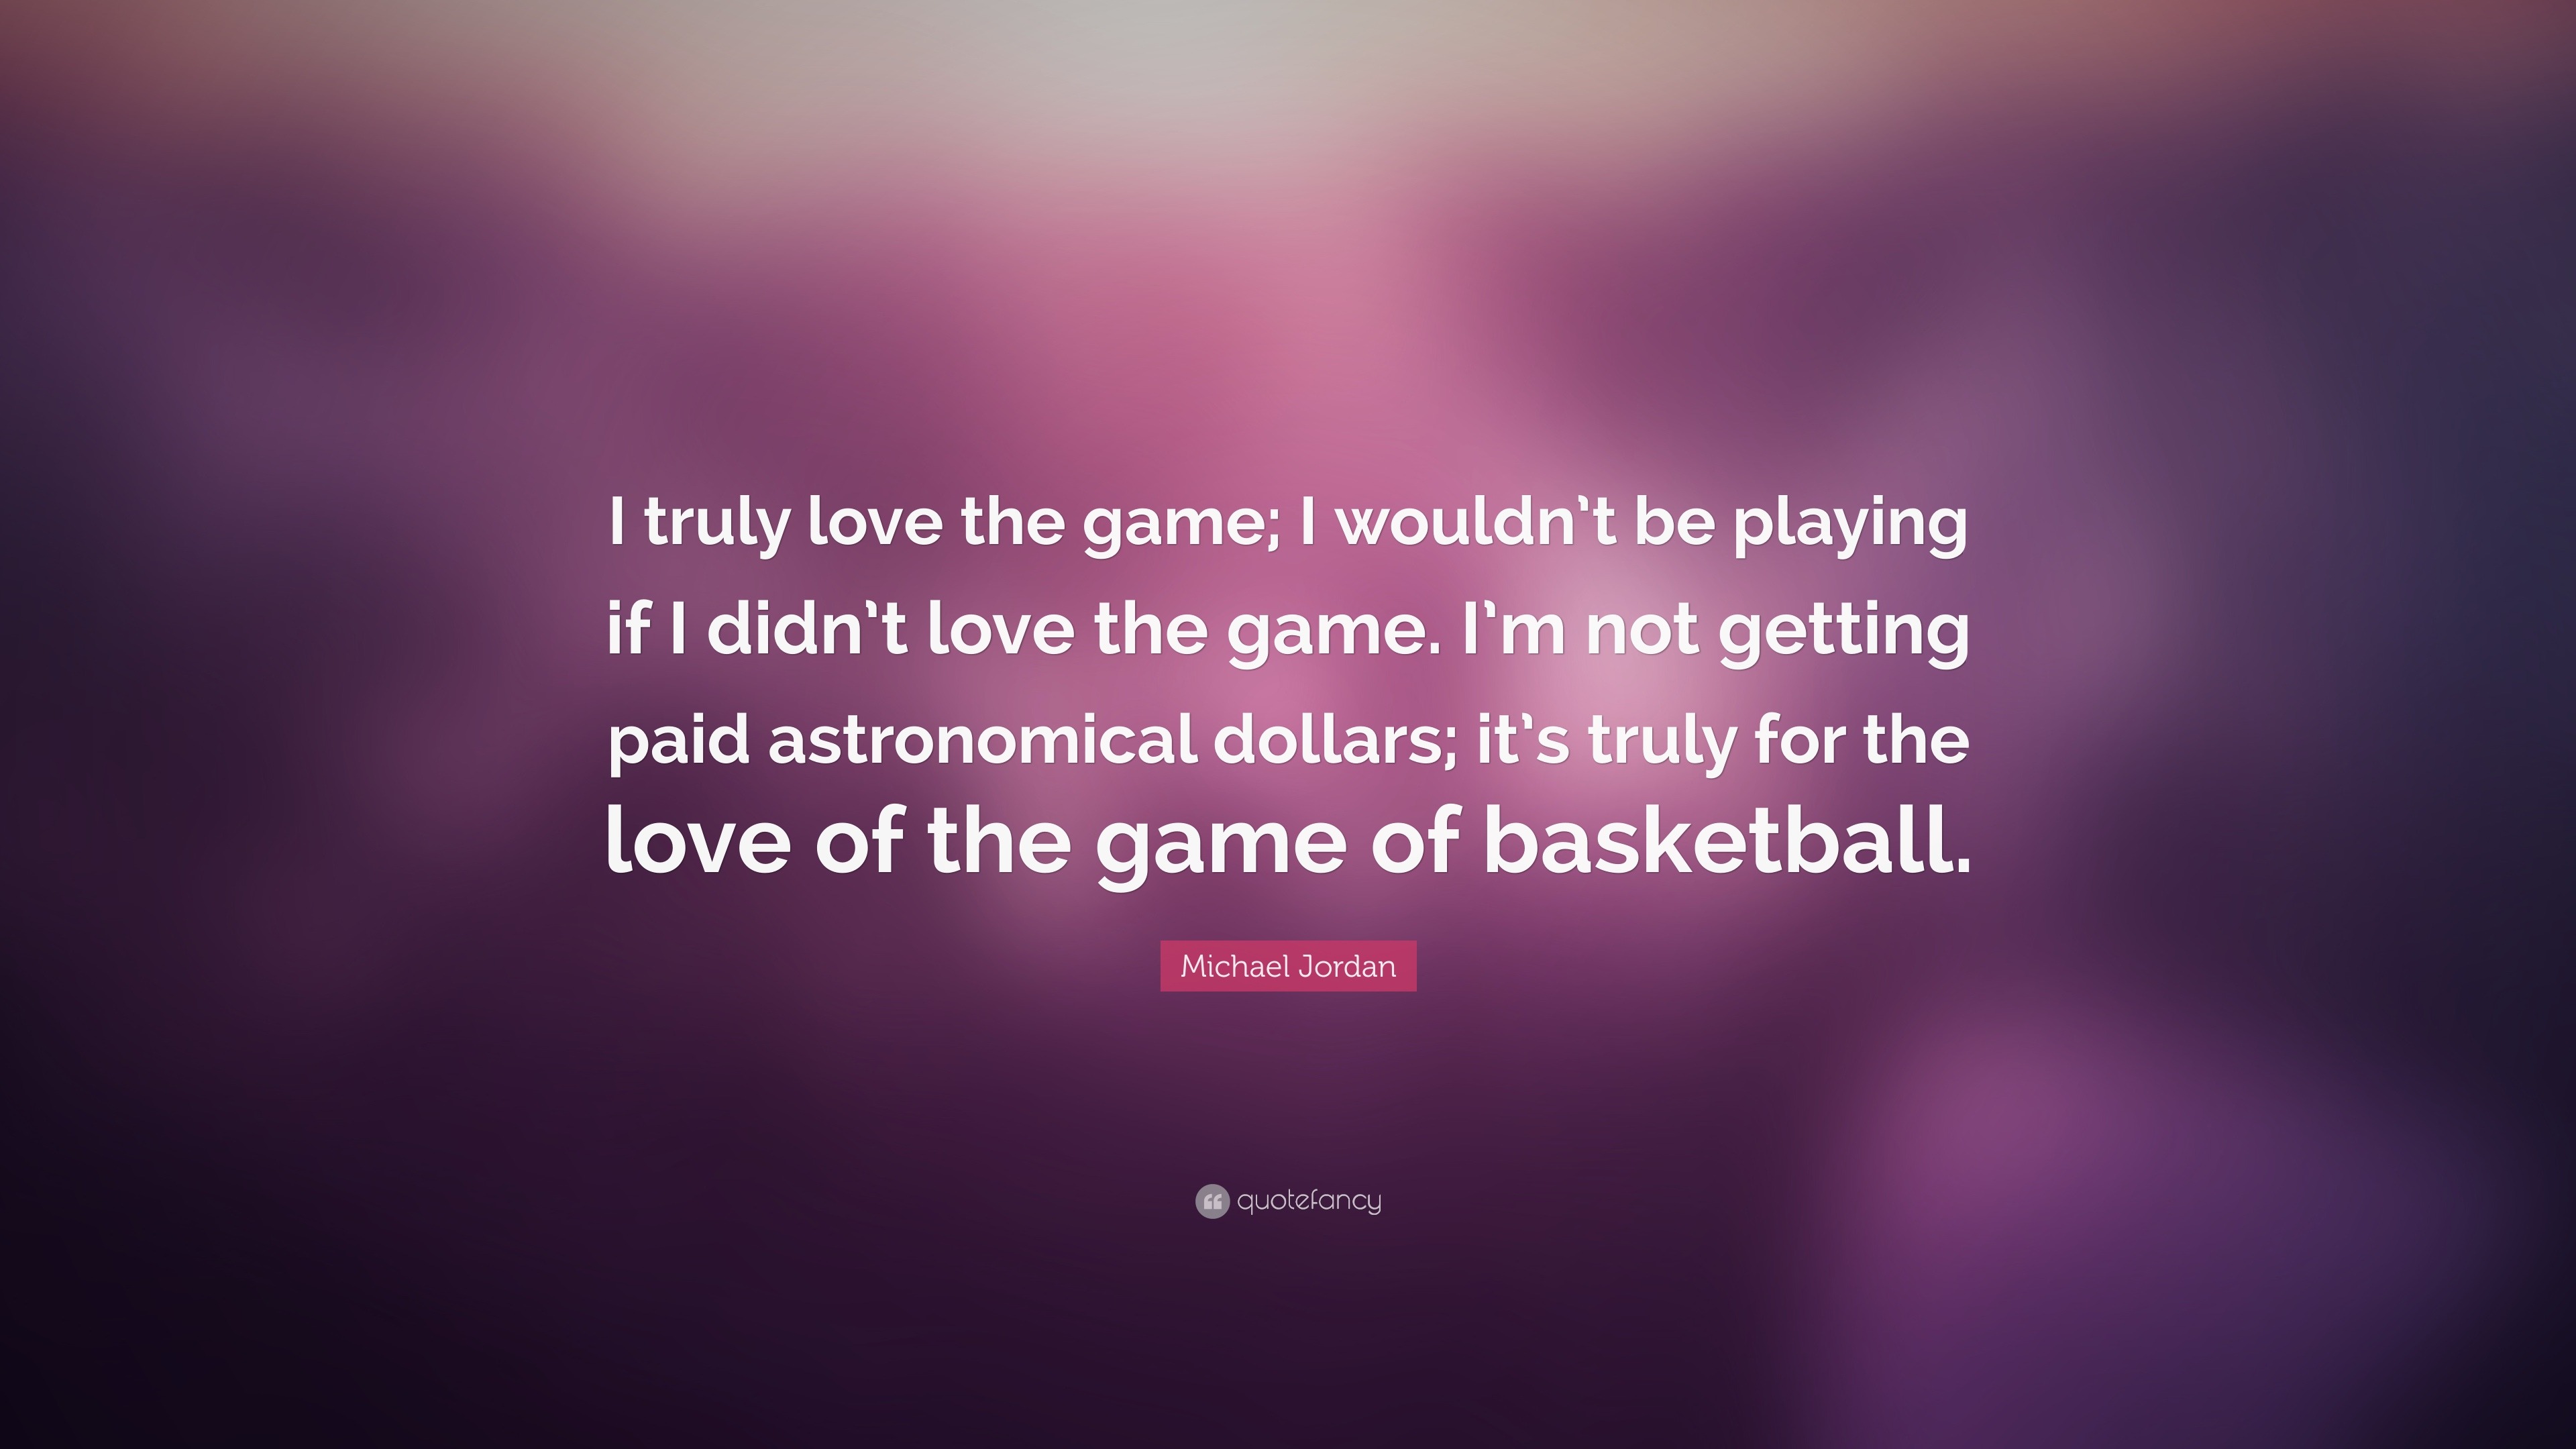 Michael Jordan Quote “I truly love the game I wouldn t be